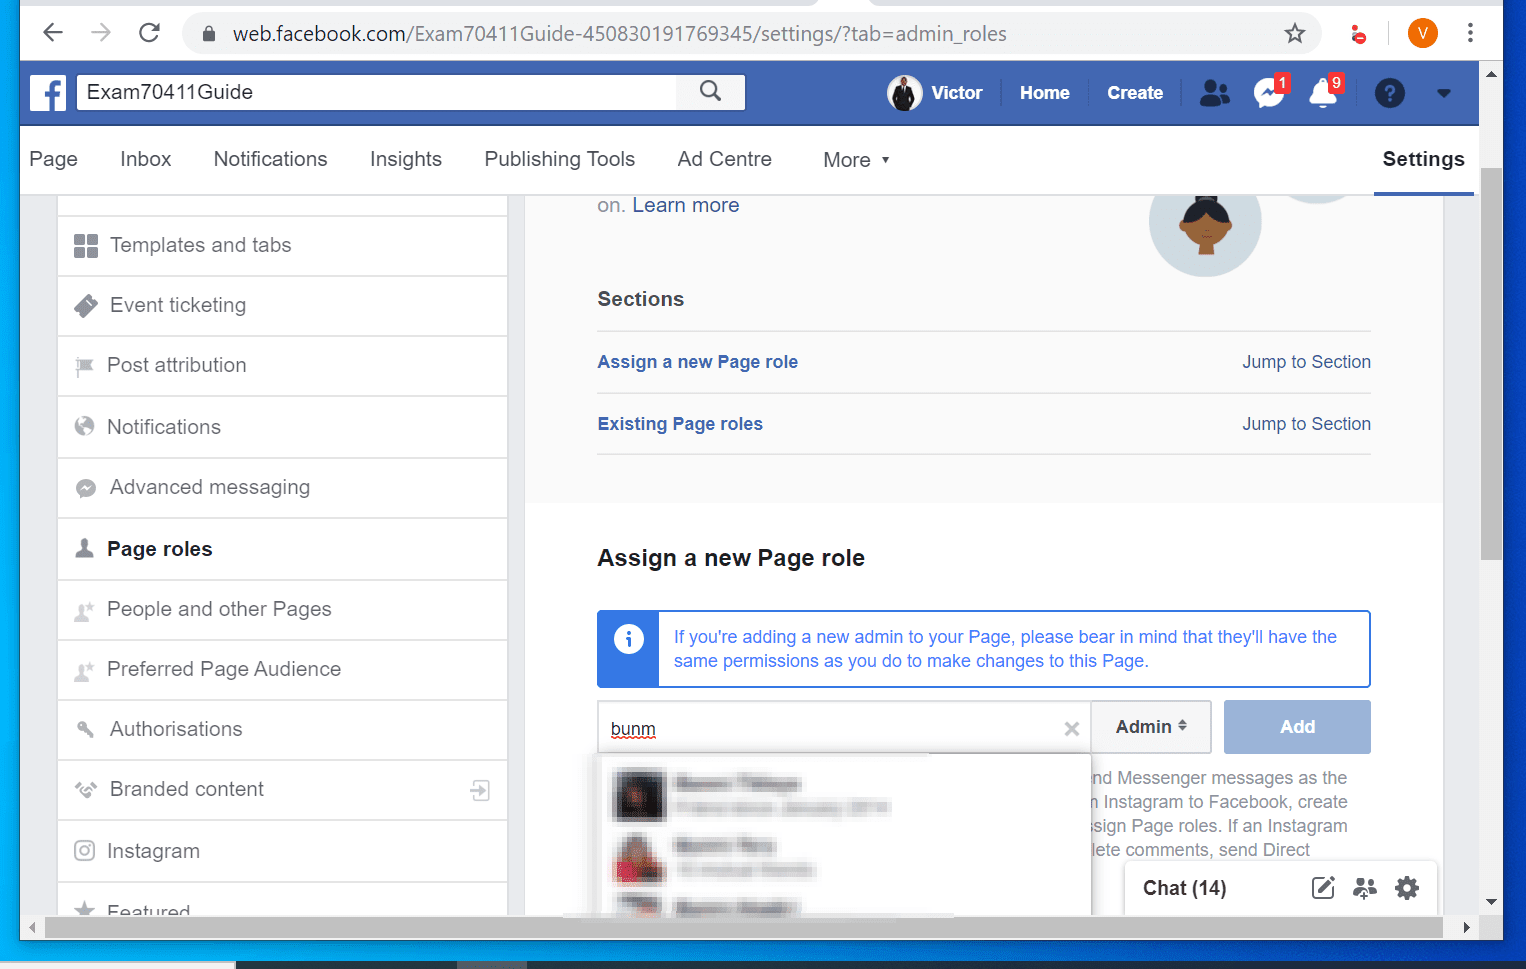 How to Add Administrator to Facebook Page (Personal or Business Page)